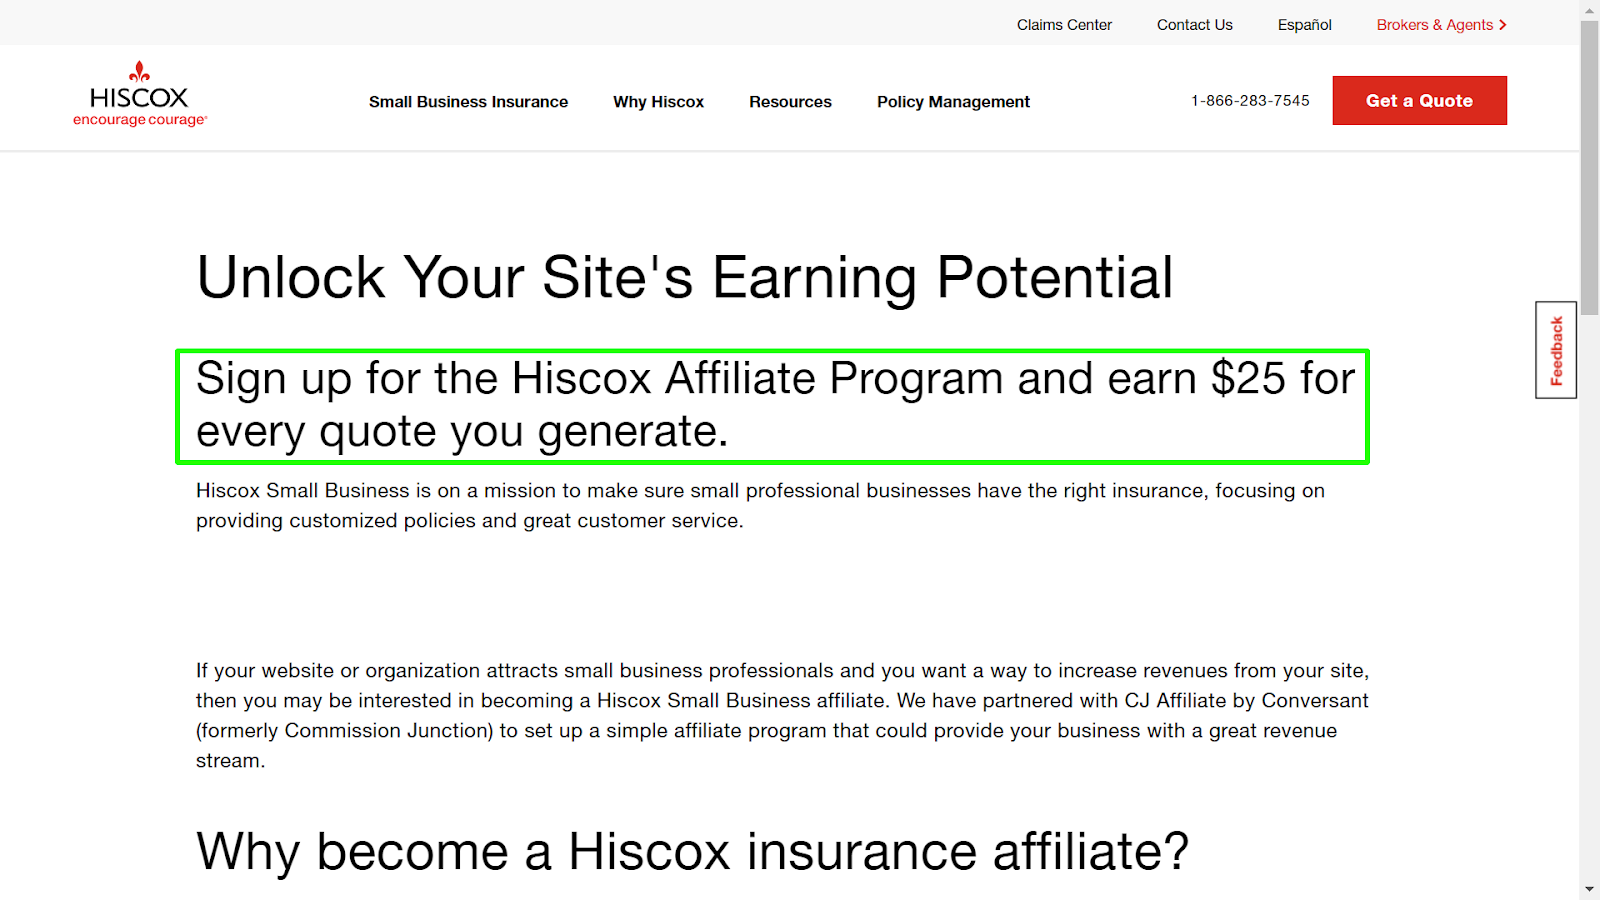 Screenshot from Hiscox affiliate program landing page, an American insurer that uses a flat fee affiliate commission model.